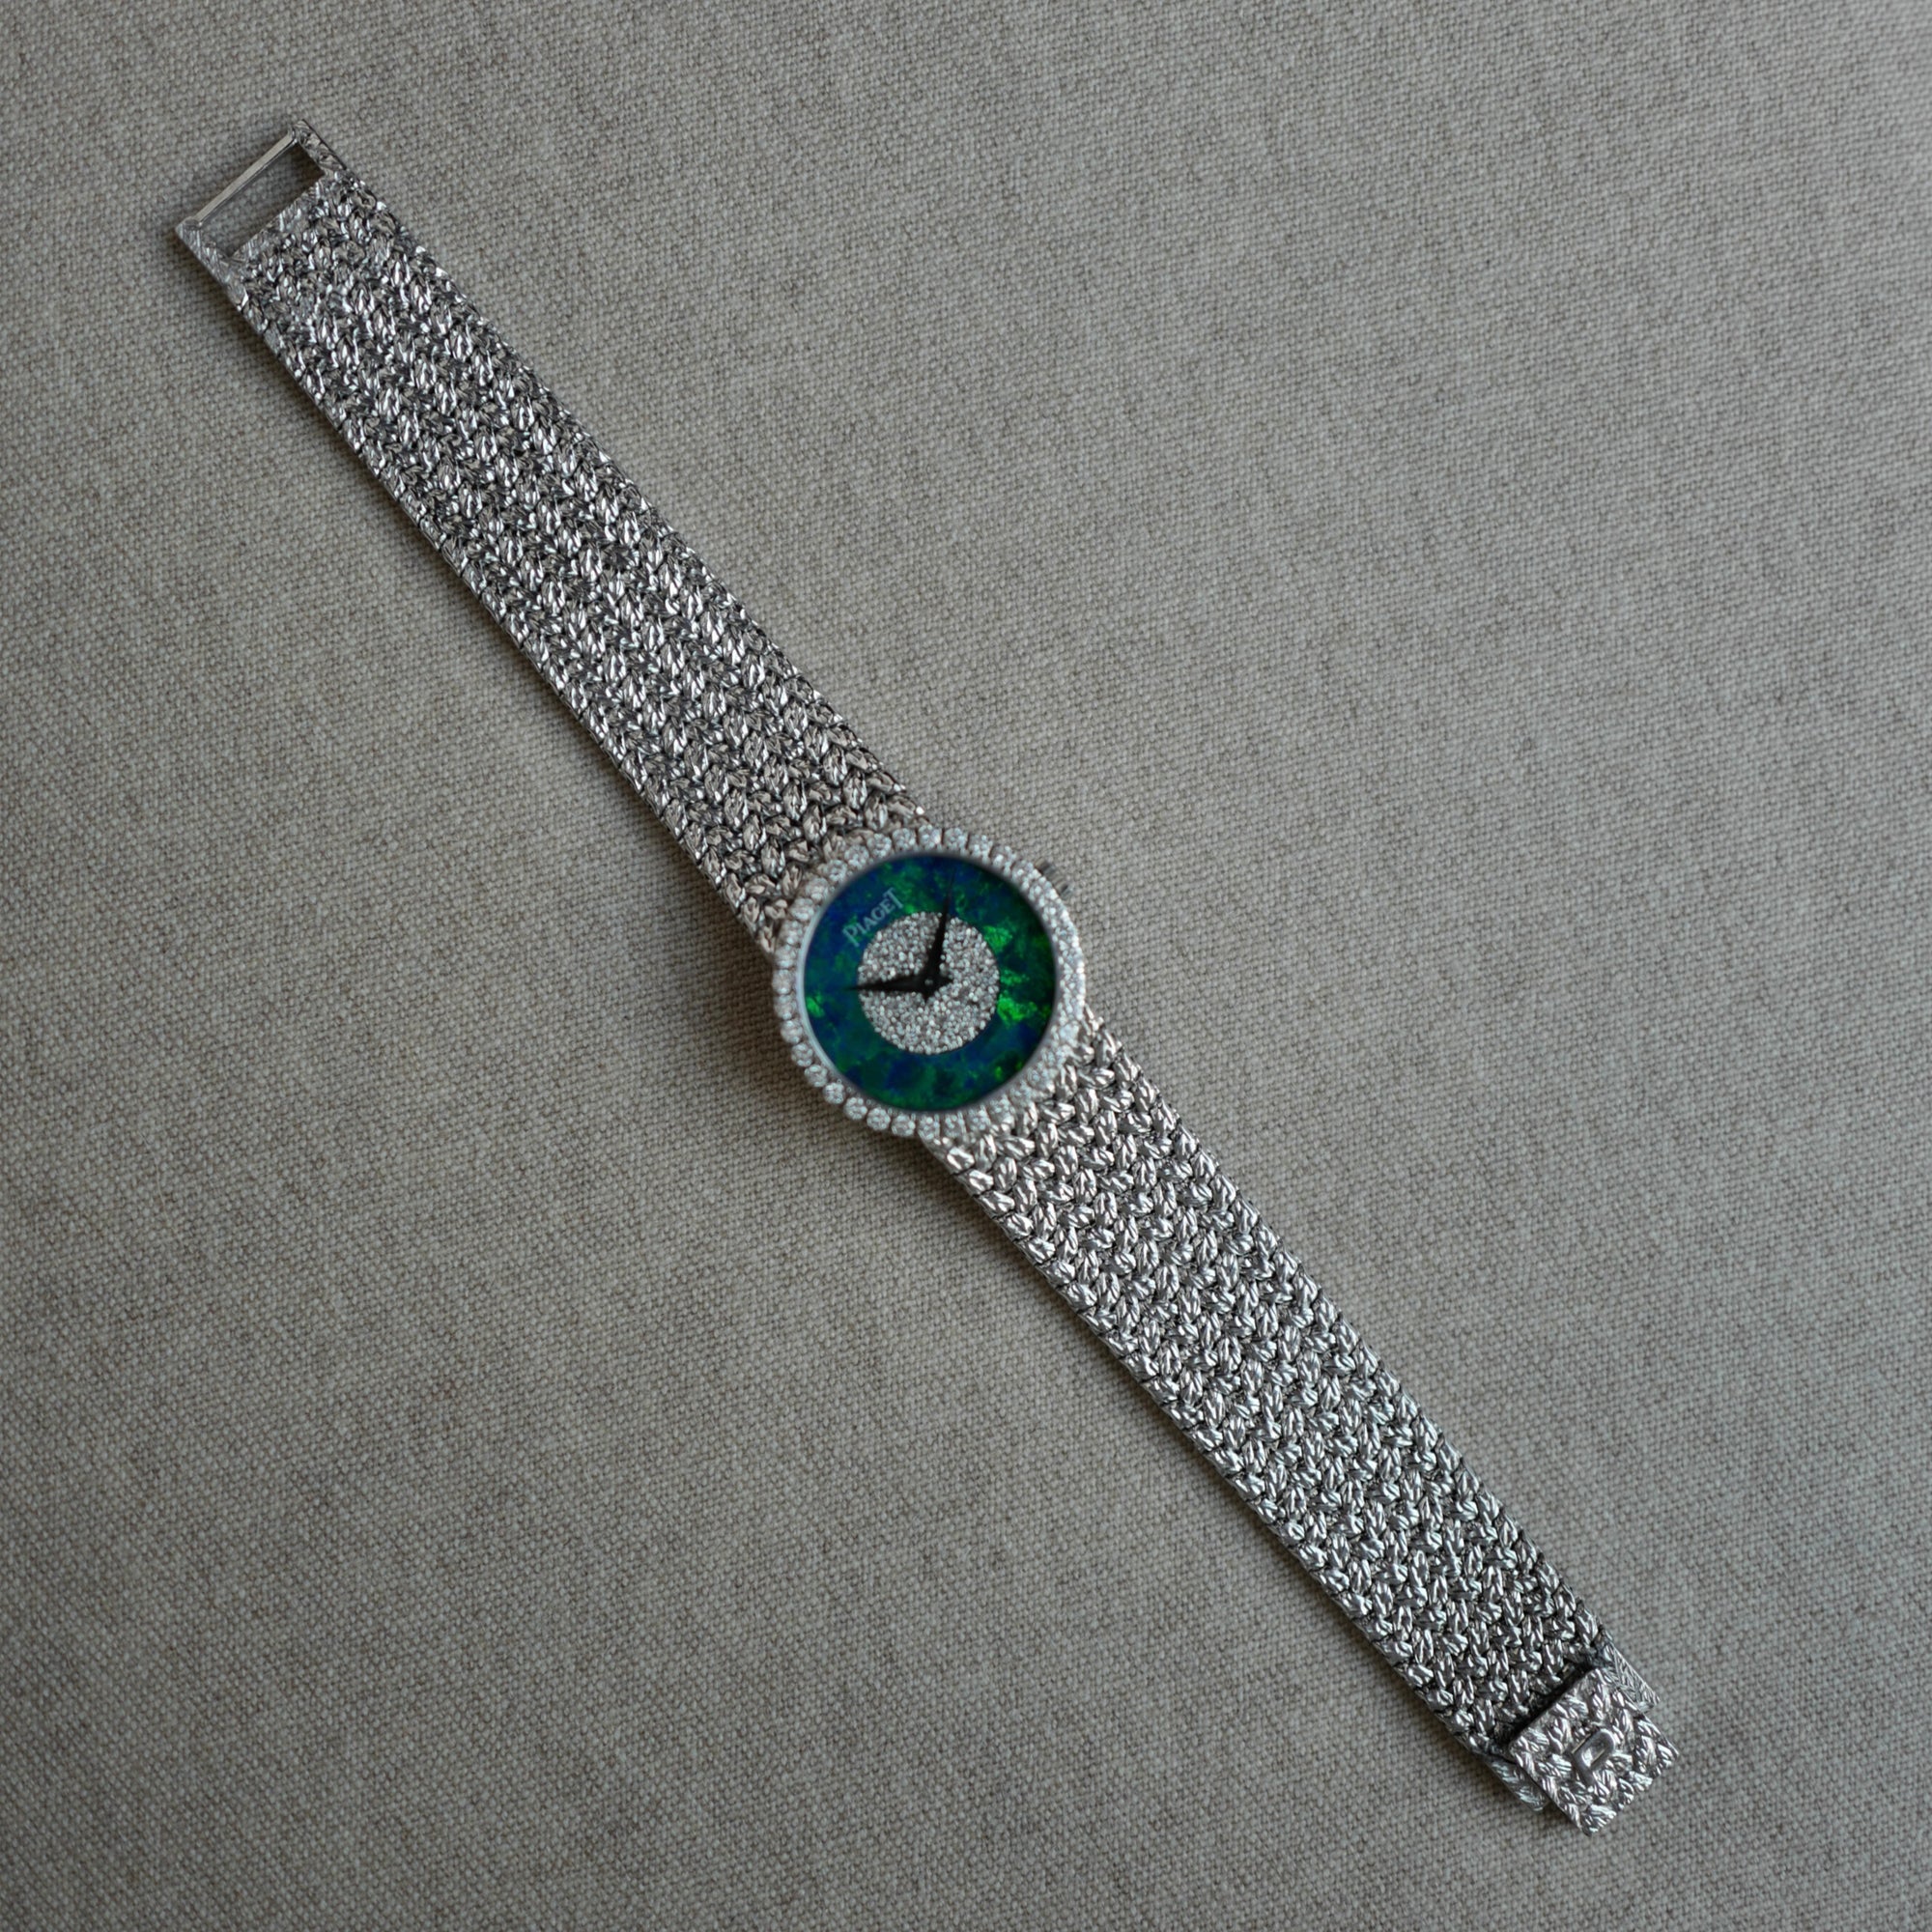 Piaget - Piaget White Gold Opal Diamond Ref. 9706D2 - The Keystone Watches